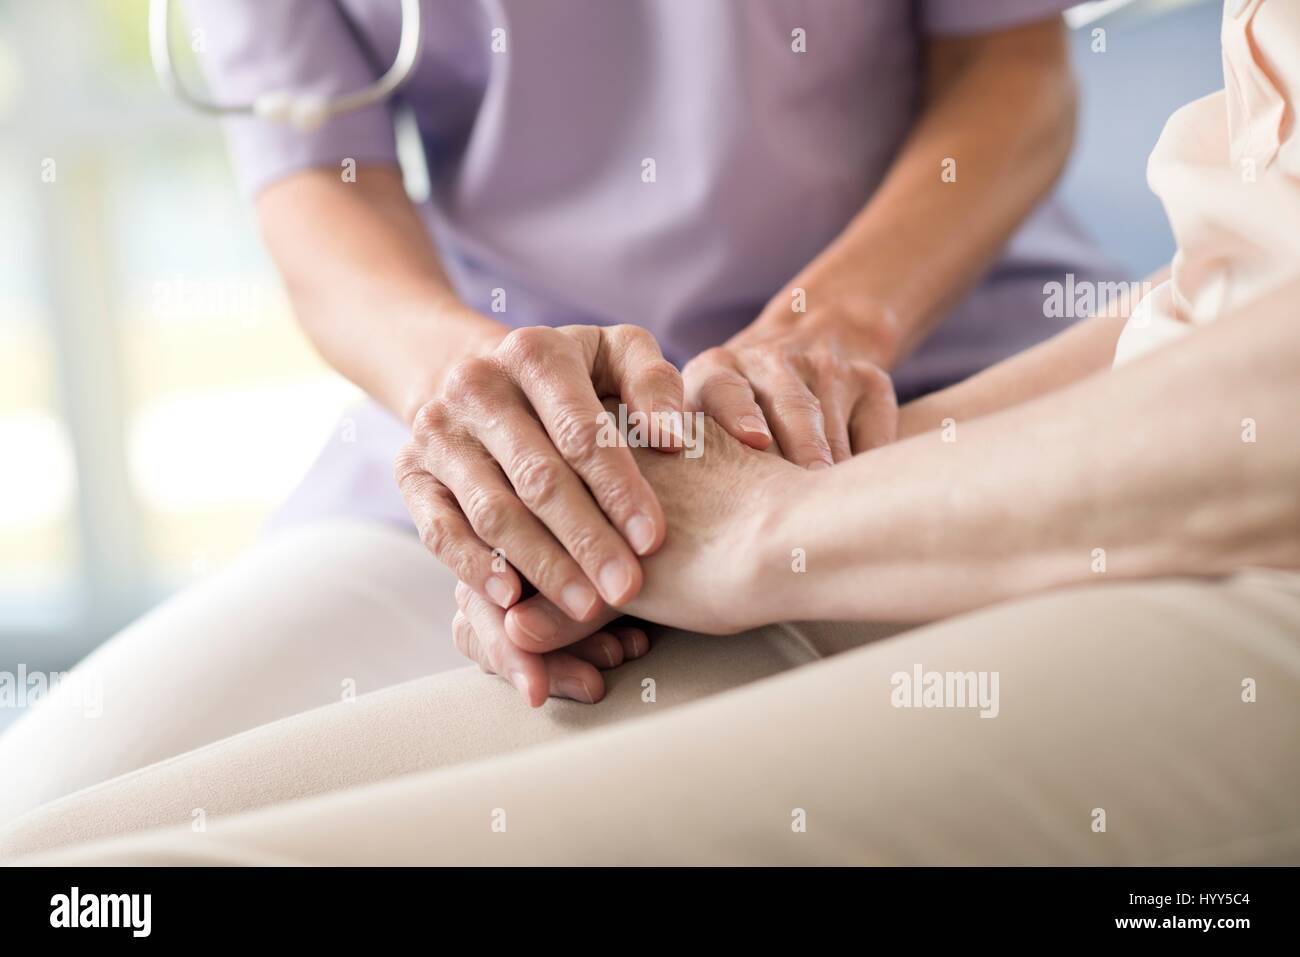 Care worker holding senior woman's hands. Stock Photo